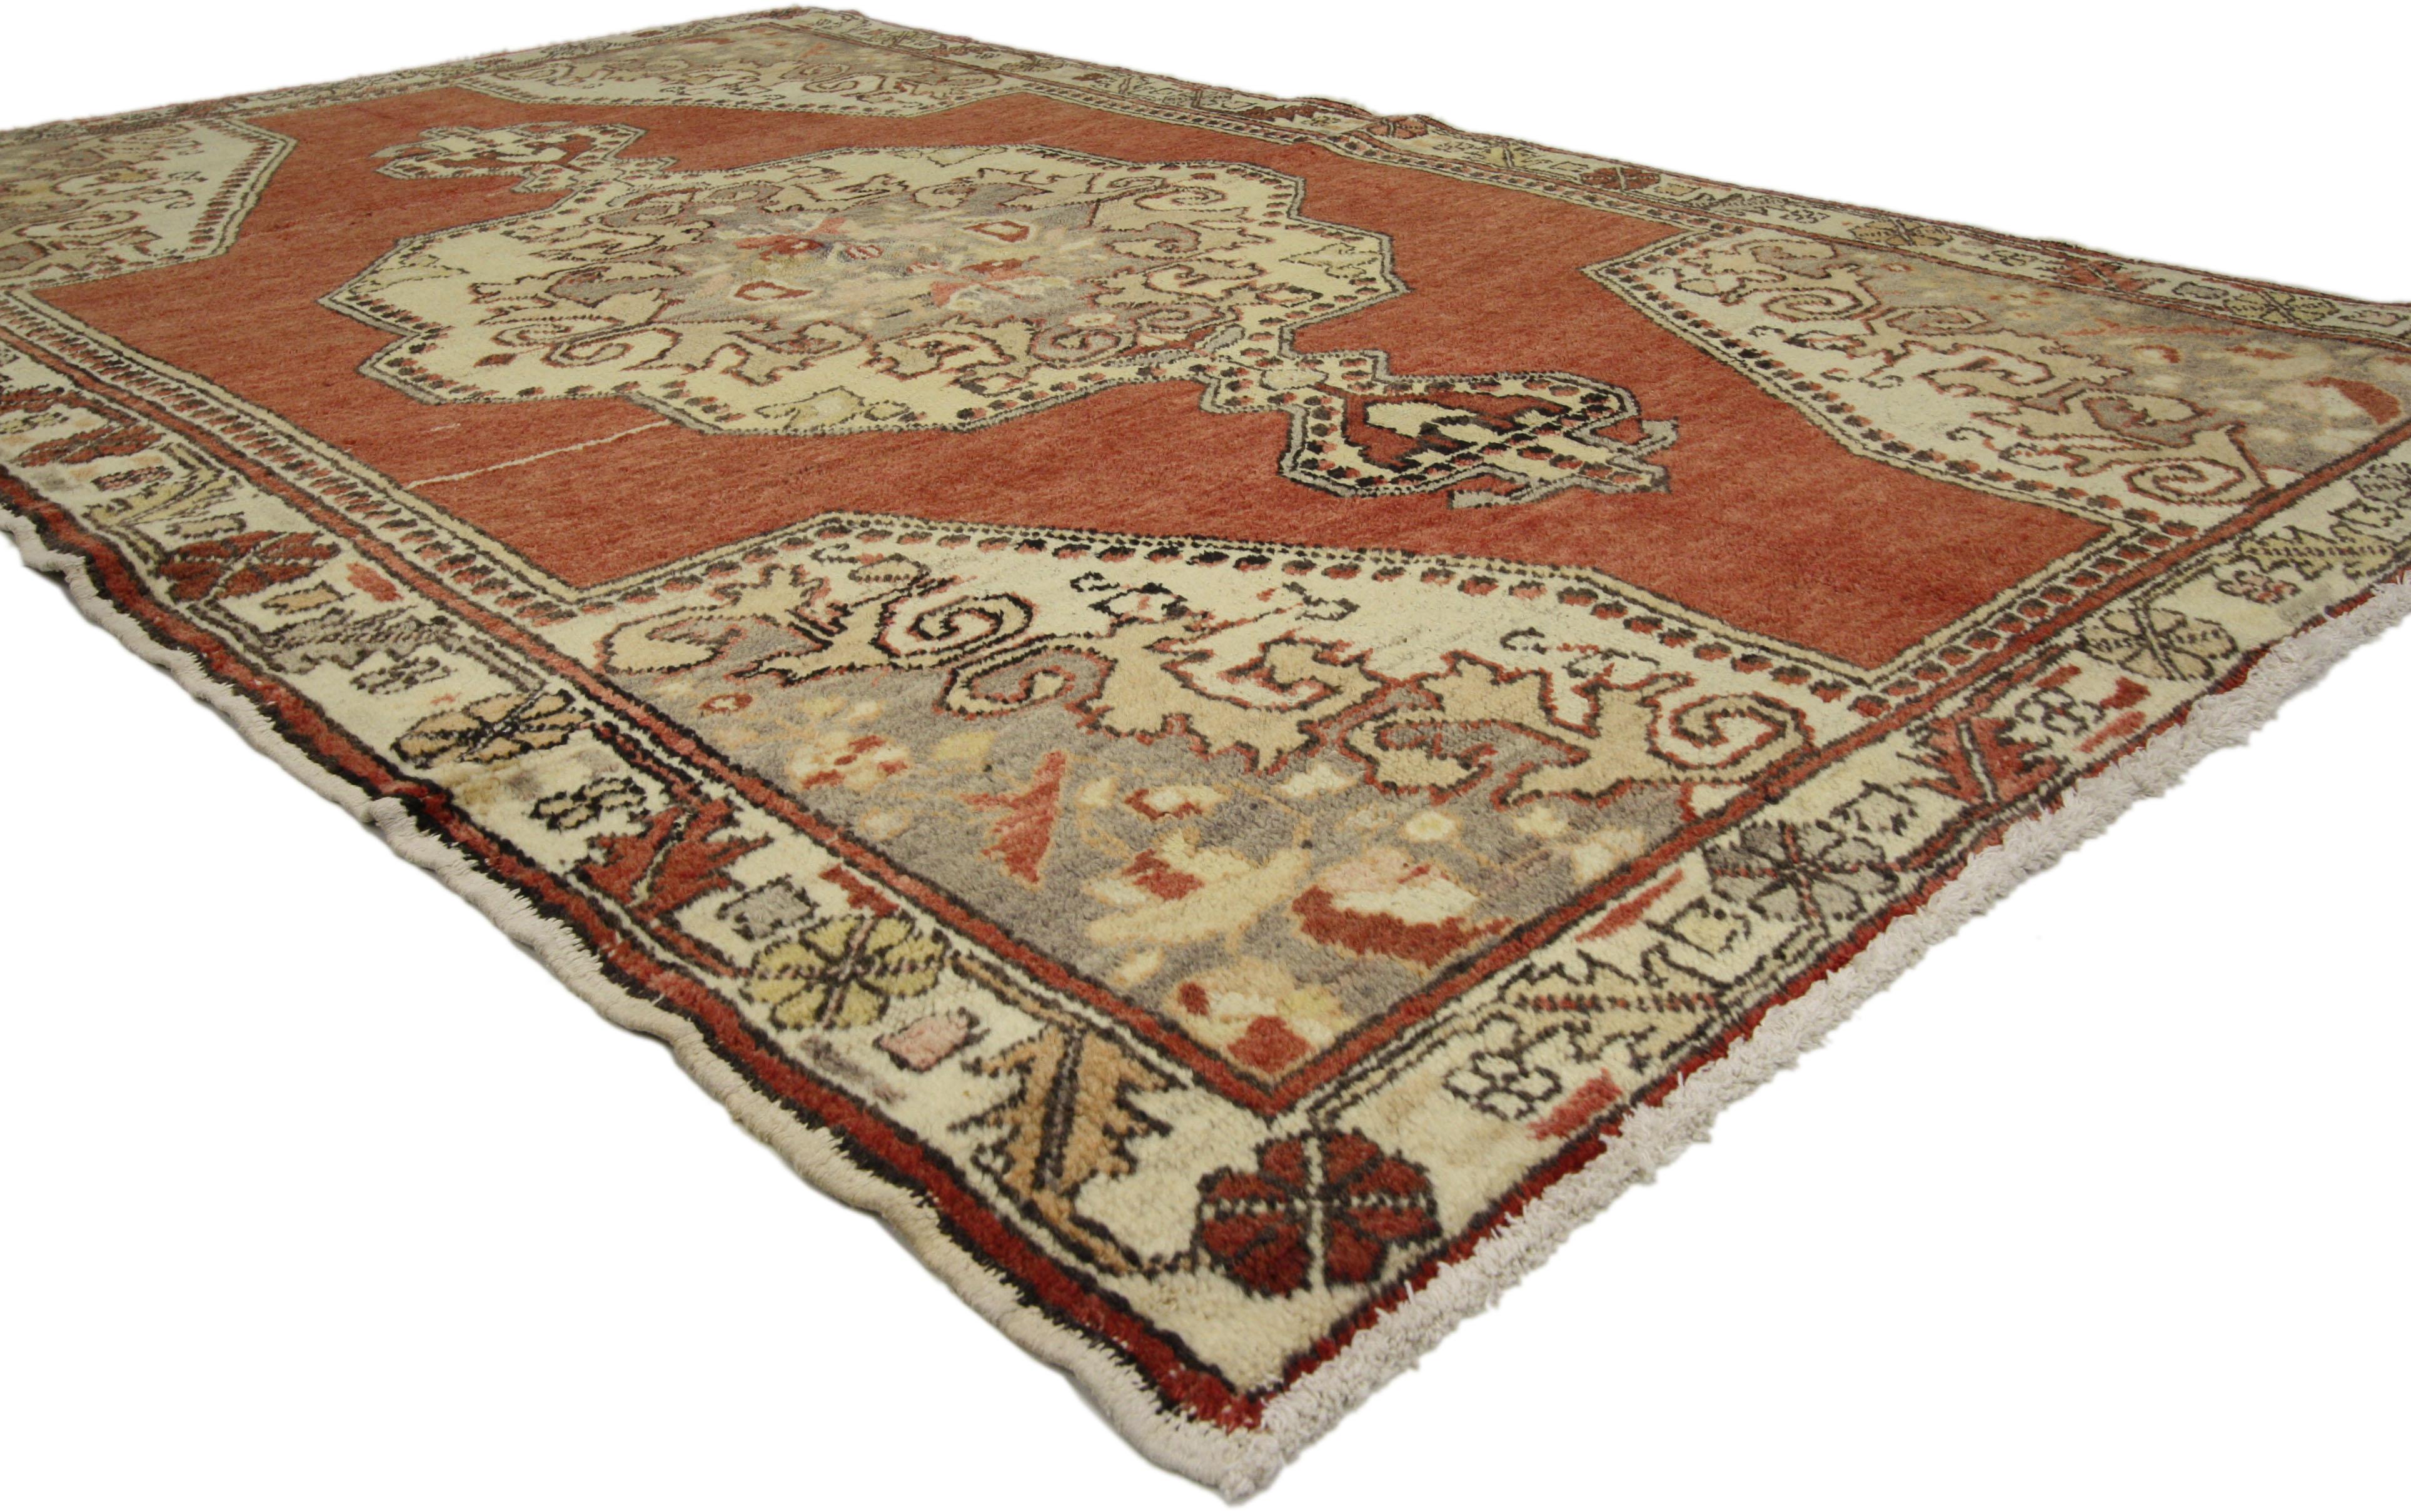 50323 Vintage Turkish Oushak Rug with Arts & Crafts Style 04'05 x 07'01. This hand knotted wool vintage Turkish Oushak rug features a large polygonal center medallion adorned with Elibelinde pendants floating in the center of an abrashed brick red